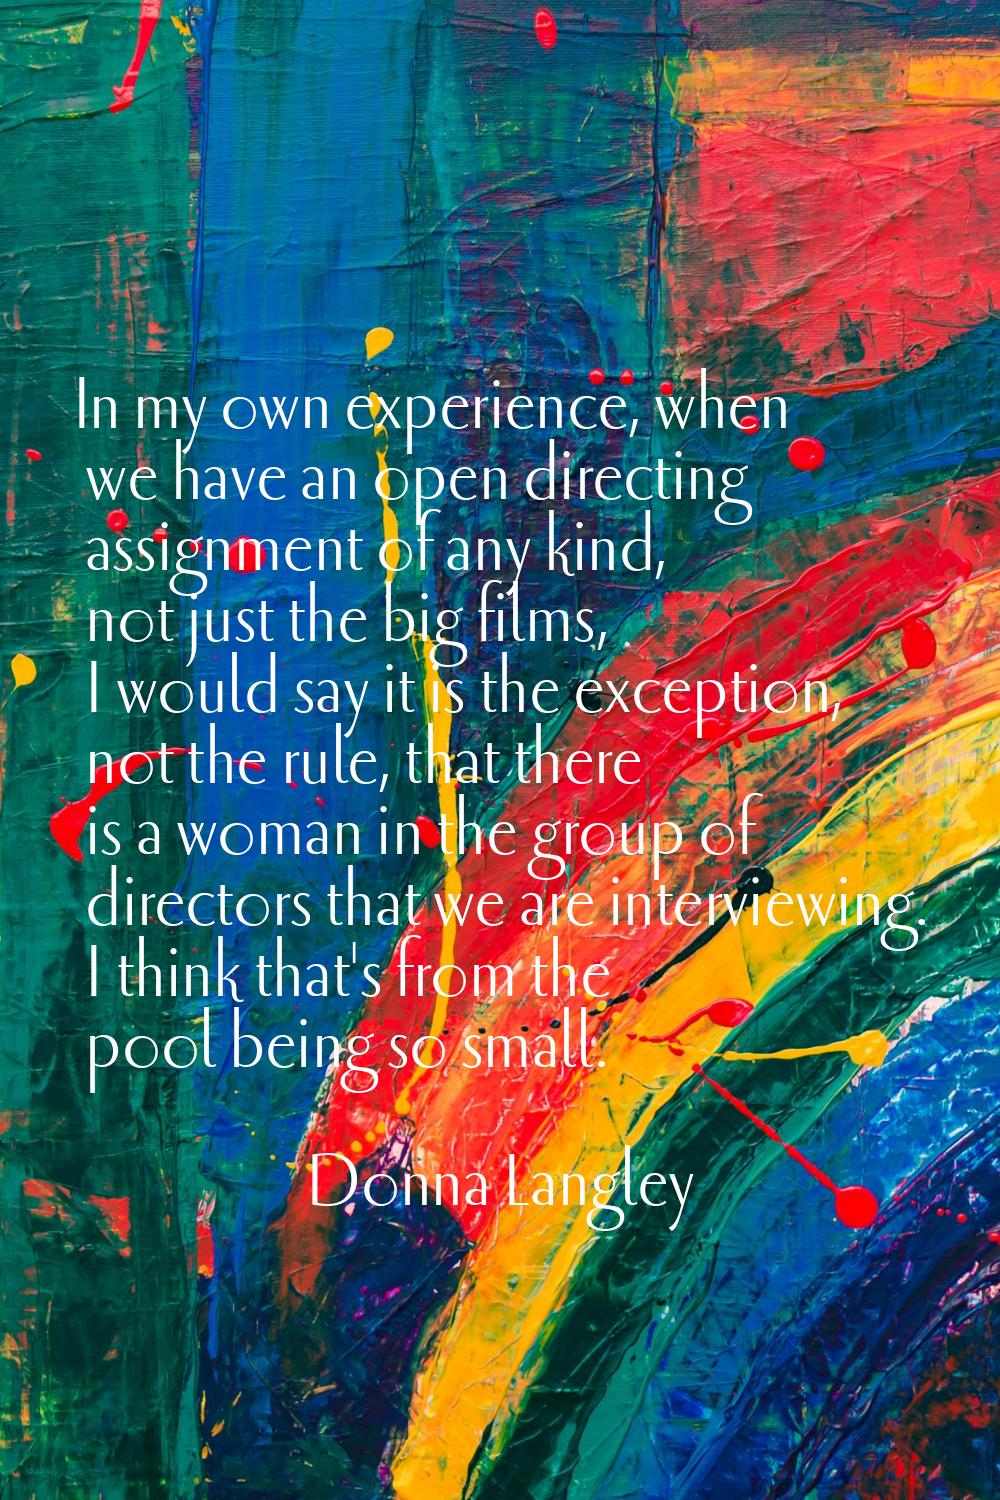 In my own experience, when we have an open directing assignment of any kind, not just the big films